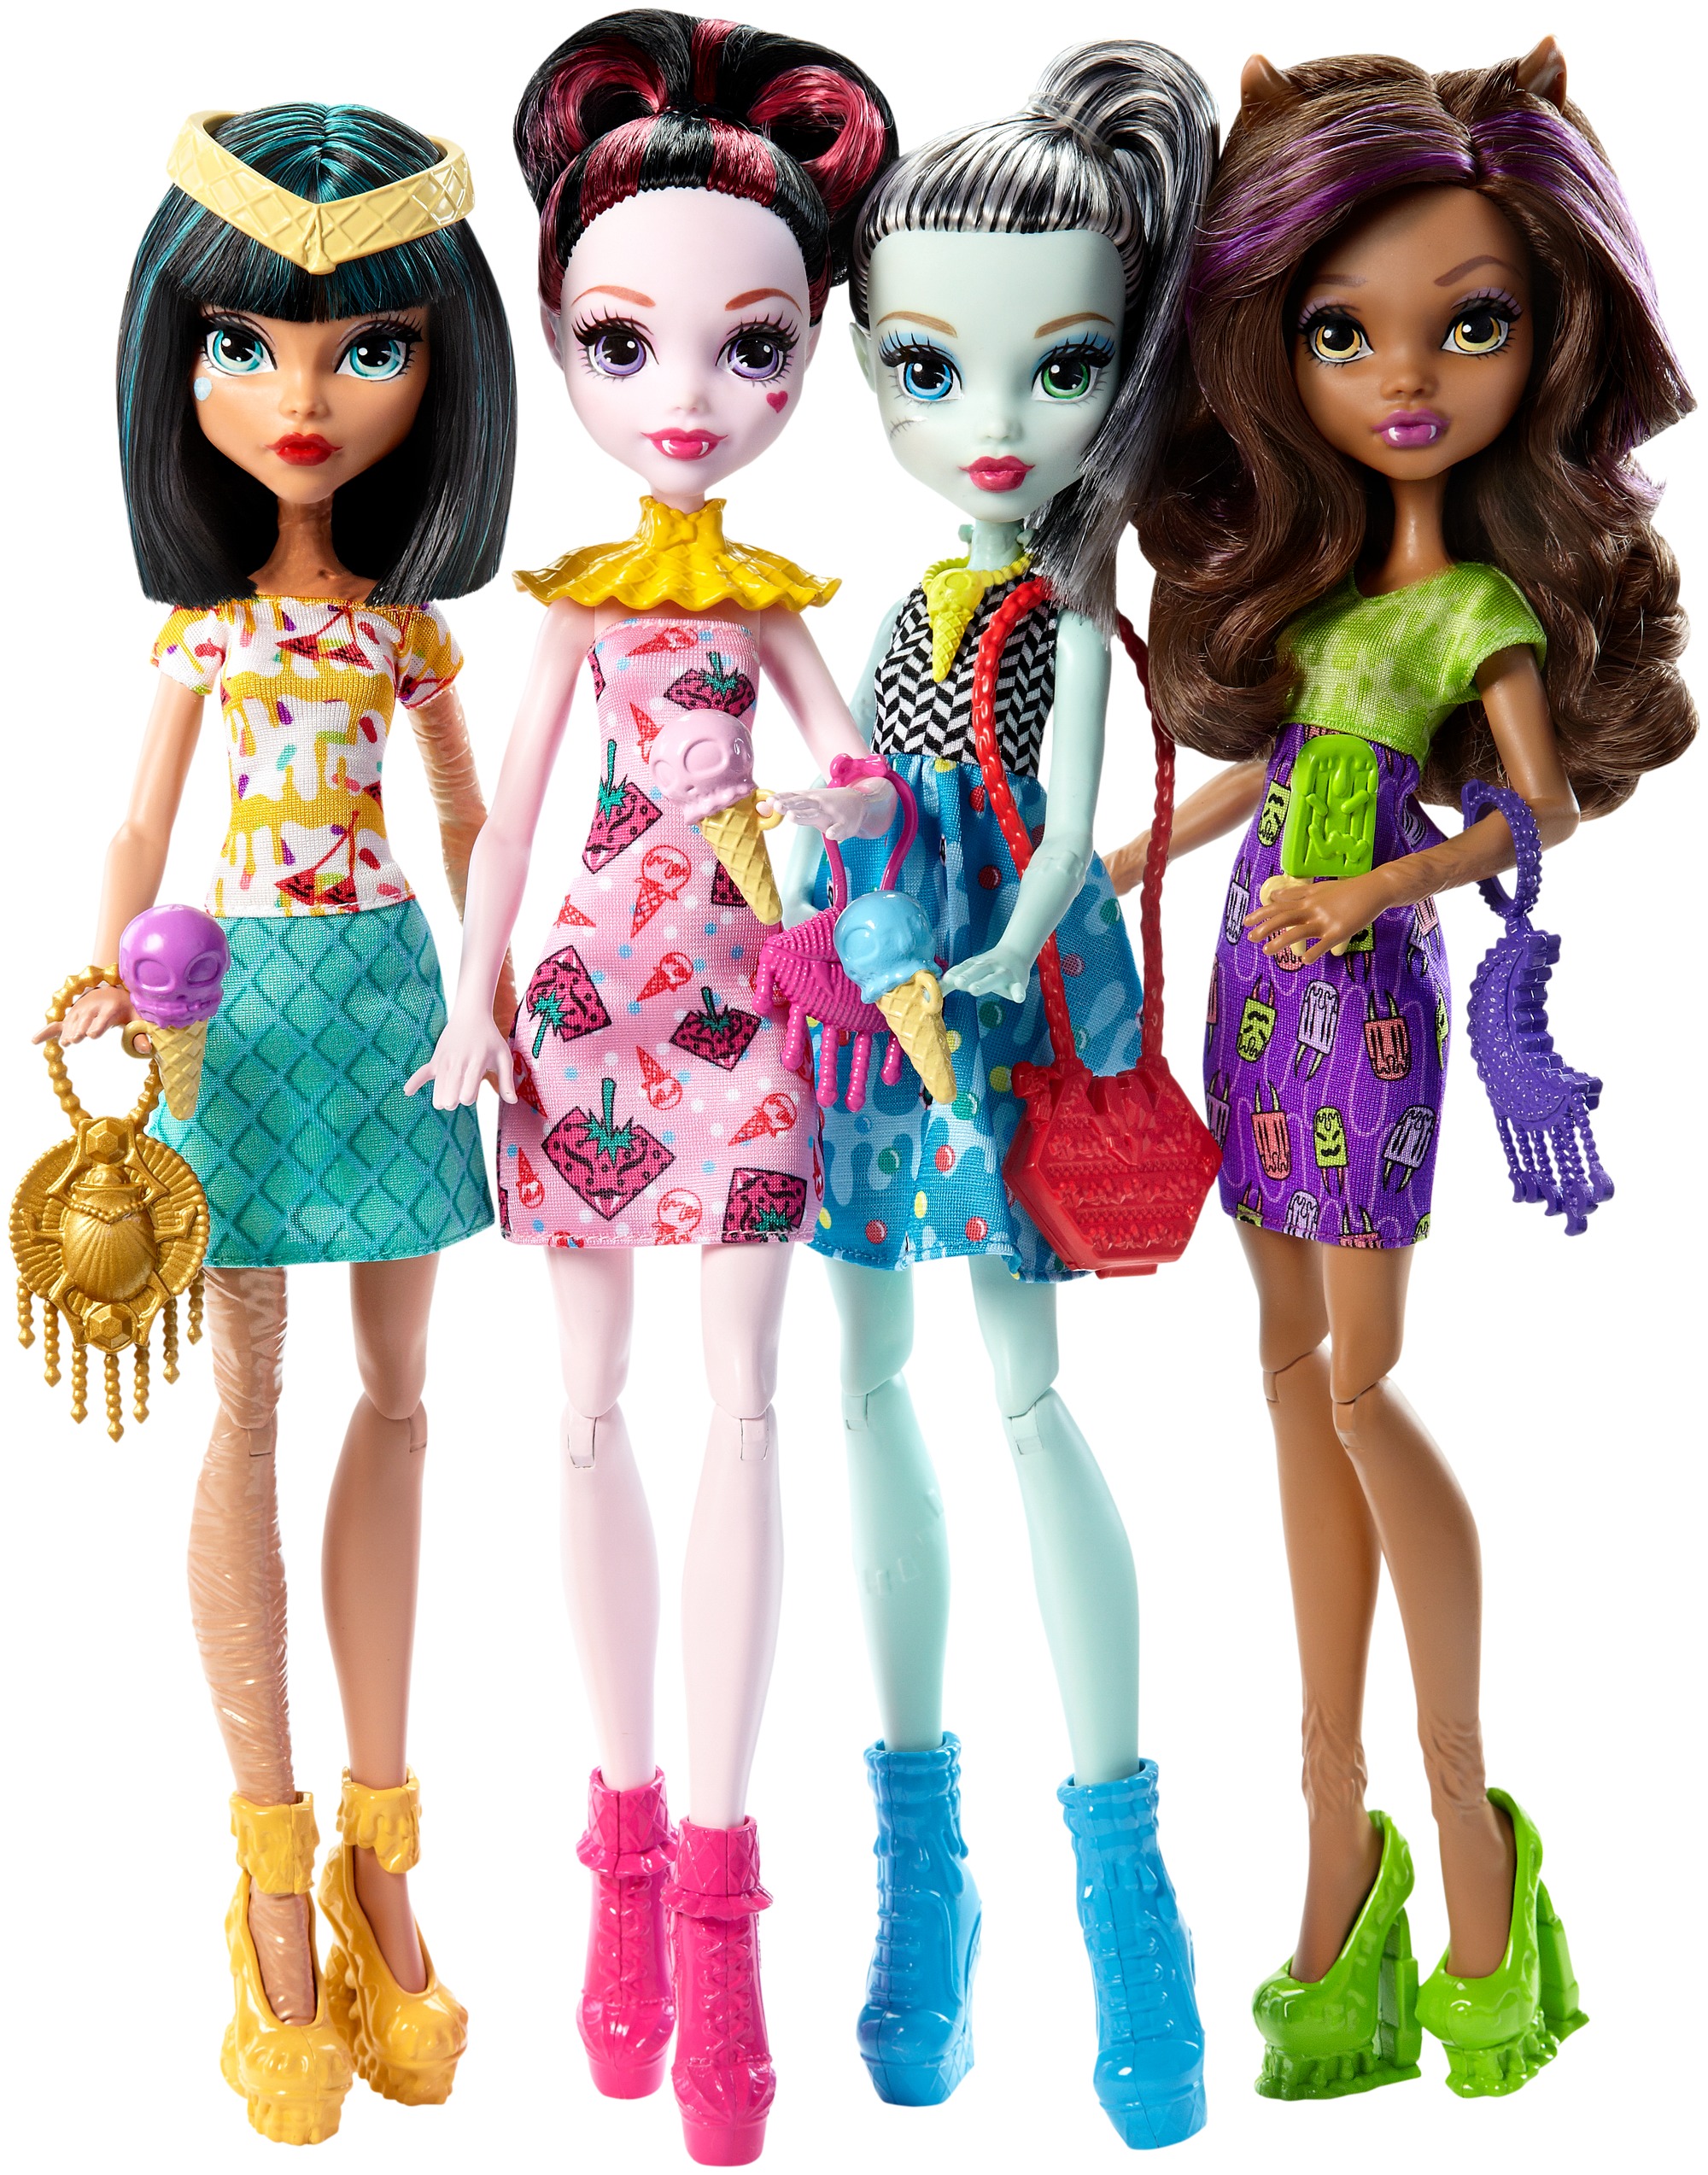 Off-White c/o Monster High Electra Melody Doll – Mattel Creations